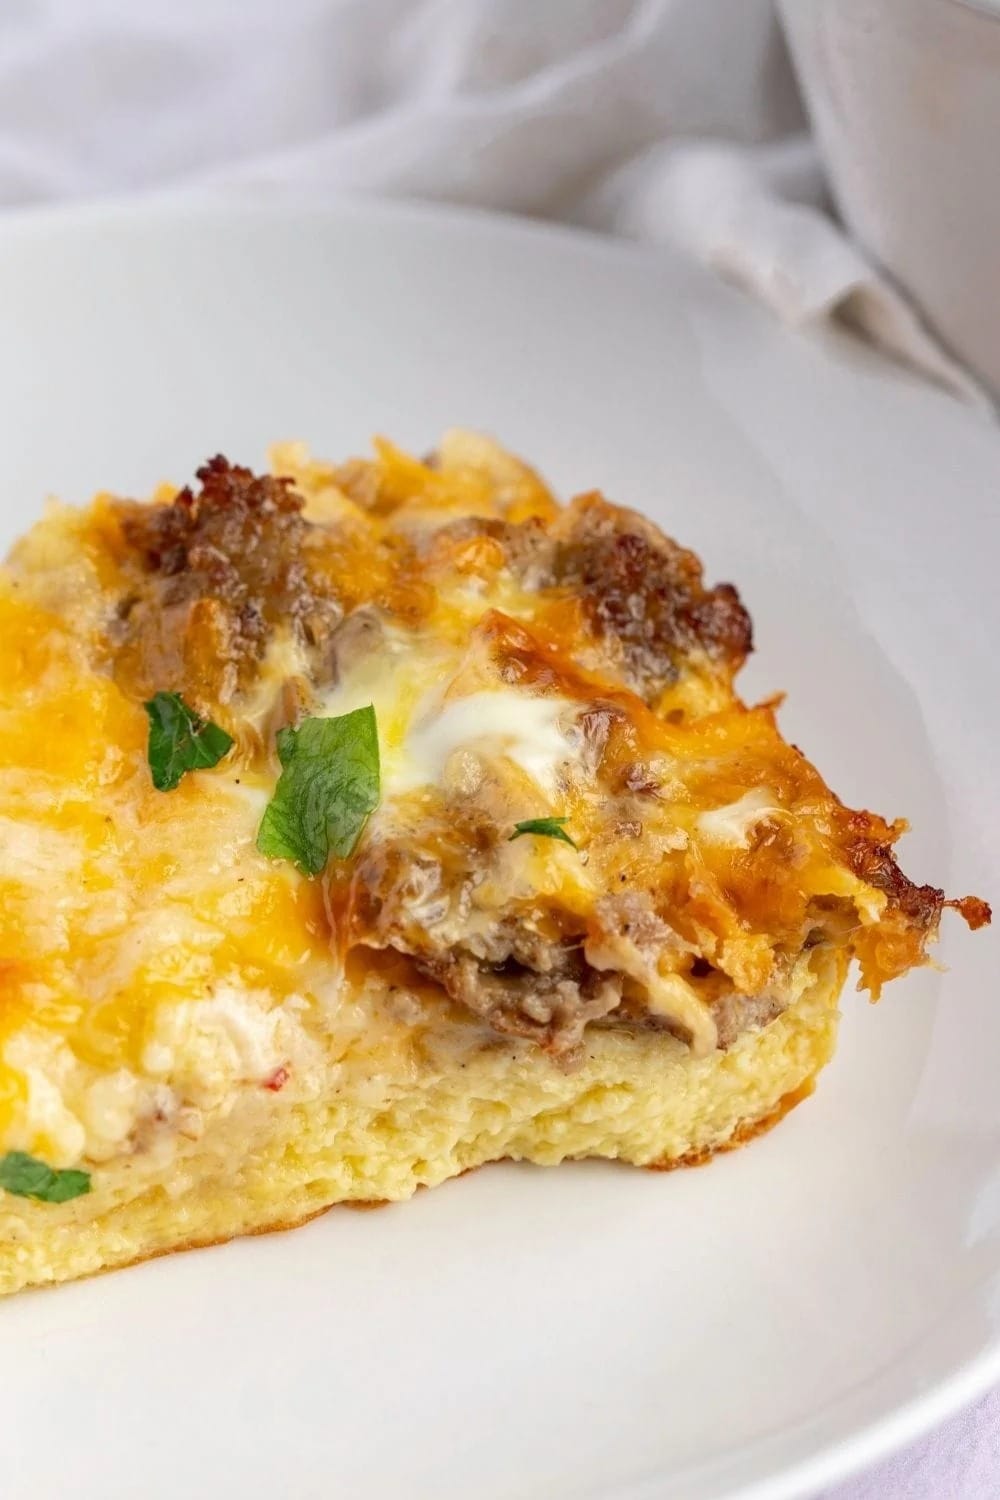 Slice of crustless egg casserole with sausage and cheese served on a plate